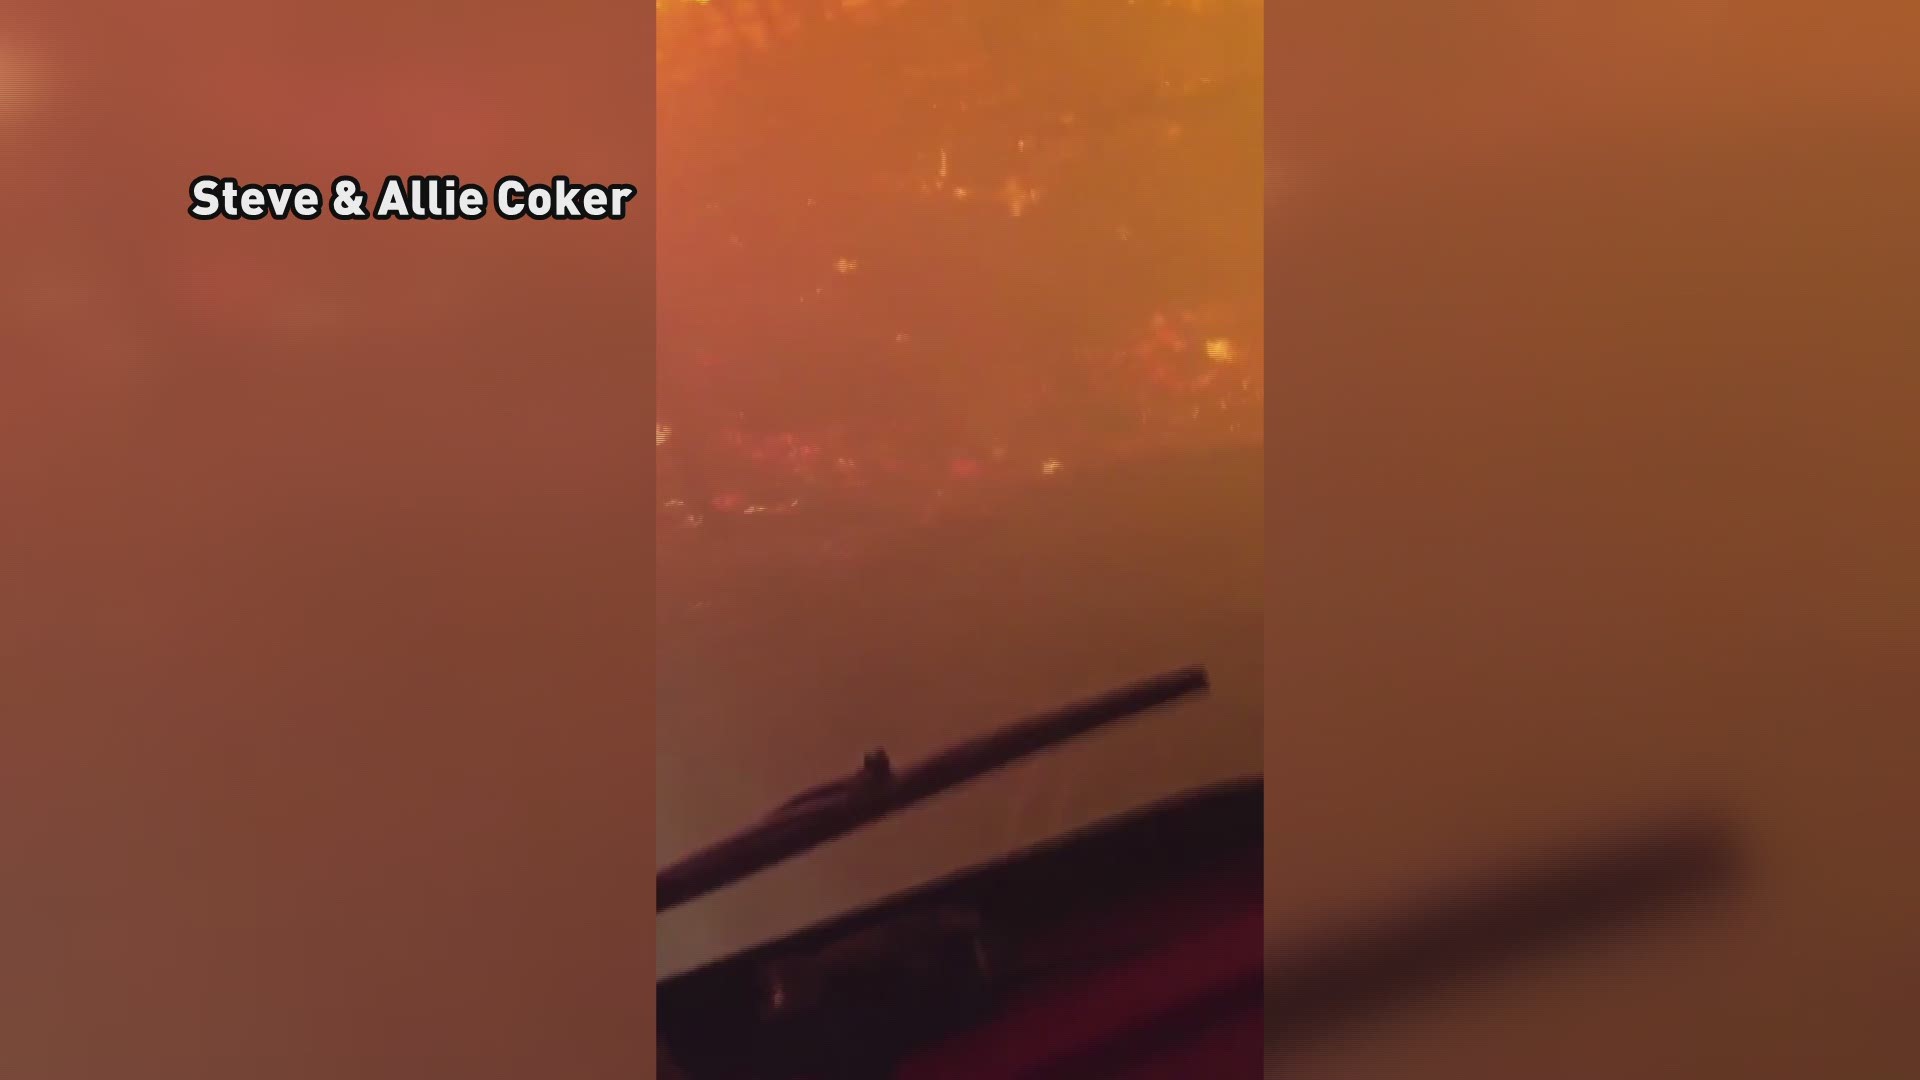 A firefighter shared this video of the conditions they faced during the Gatlinburg wildfires on Monday, Nov. 28, 2016. Video courtesy Allie & Steve Coker.